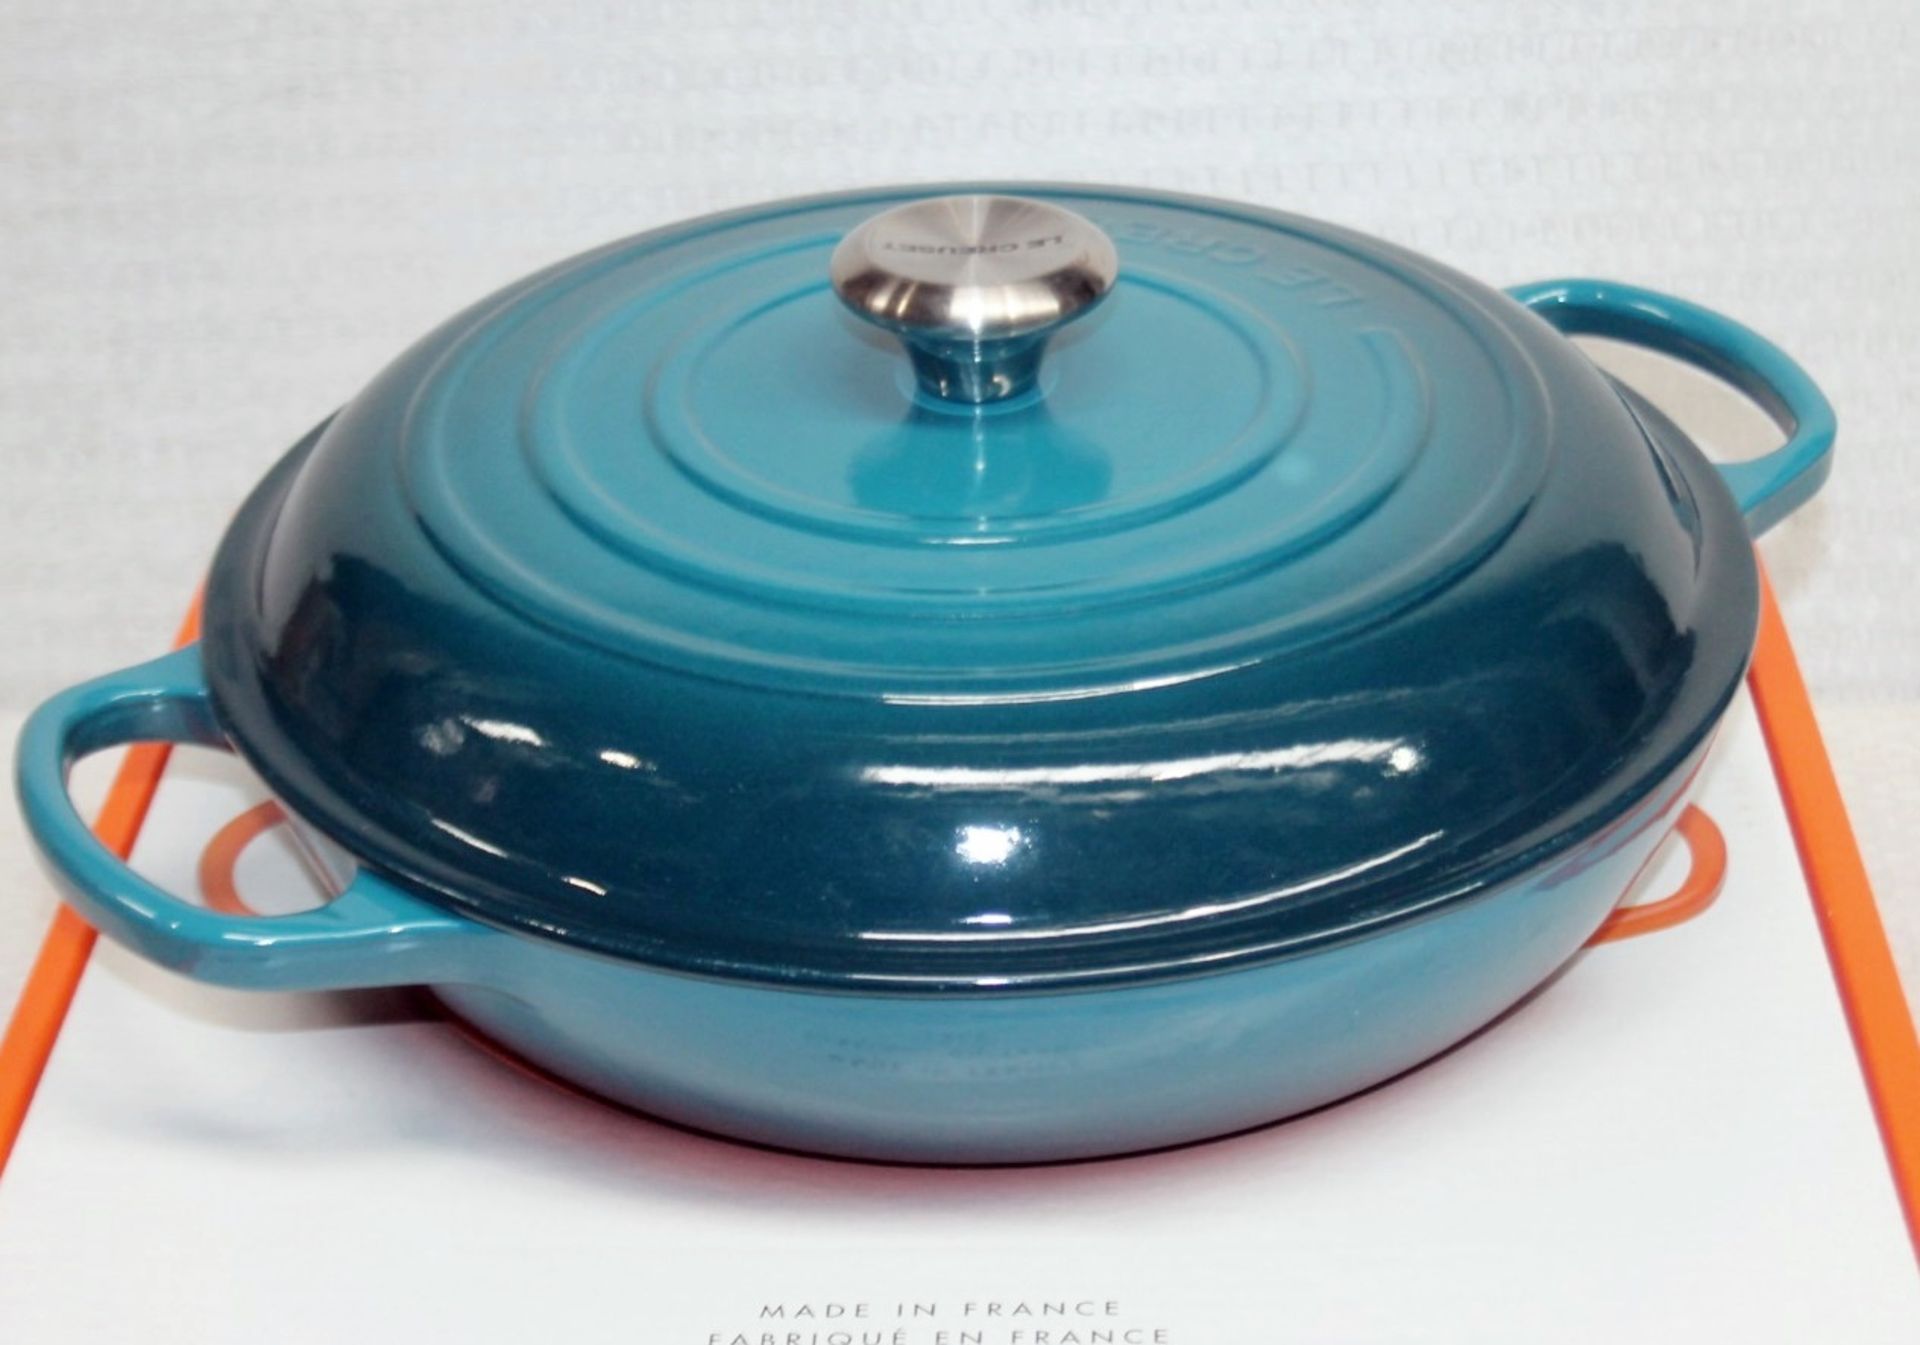 1 x LE CREUSET 'Signature' Enamelled Cast Iron Shallow Casserole Dish In Teal - RRP £270.00 - Image 9 of 13